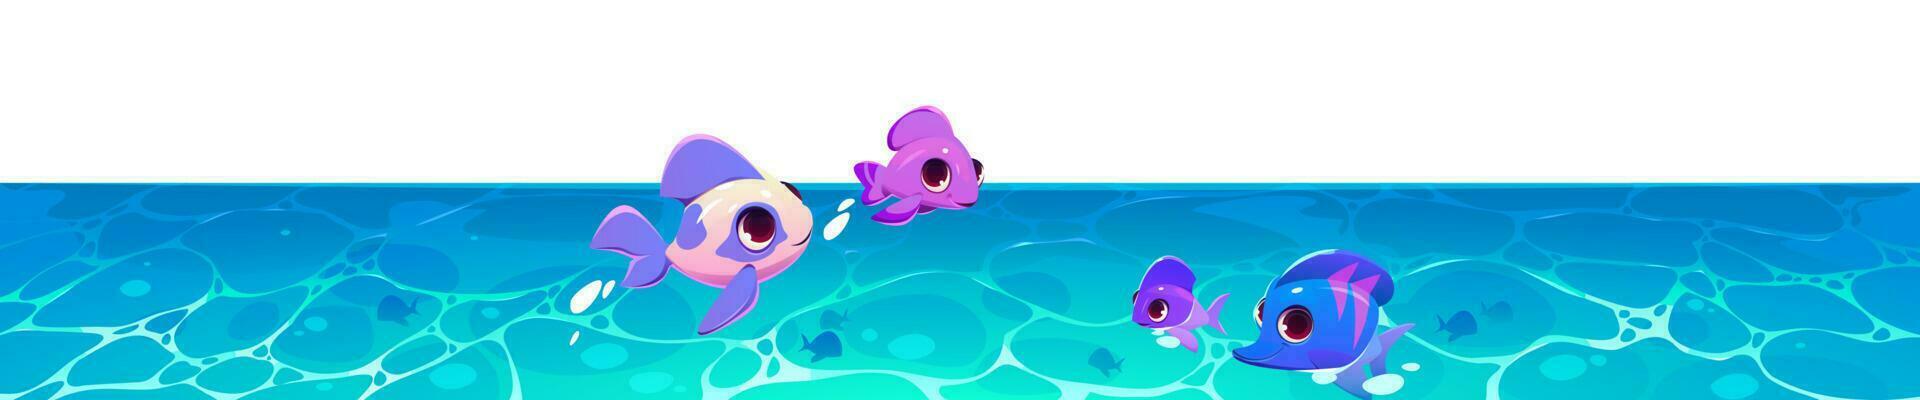 Isolated cartoon sea underwater with fish family vector